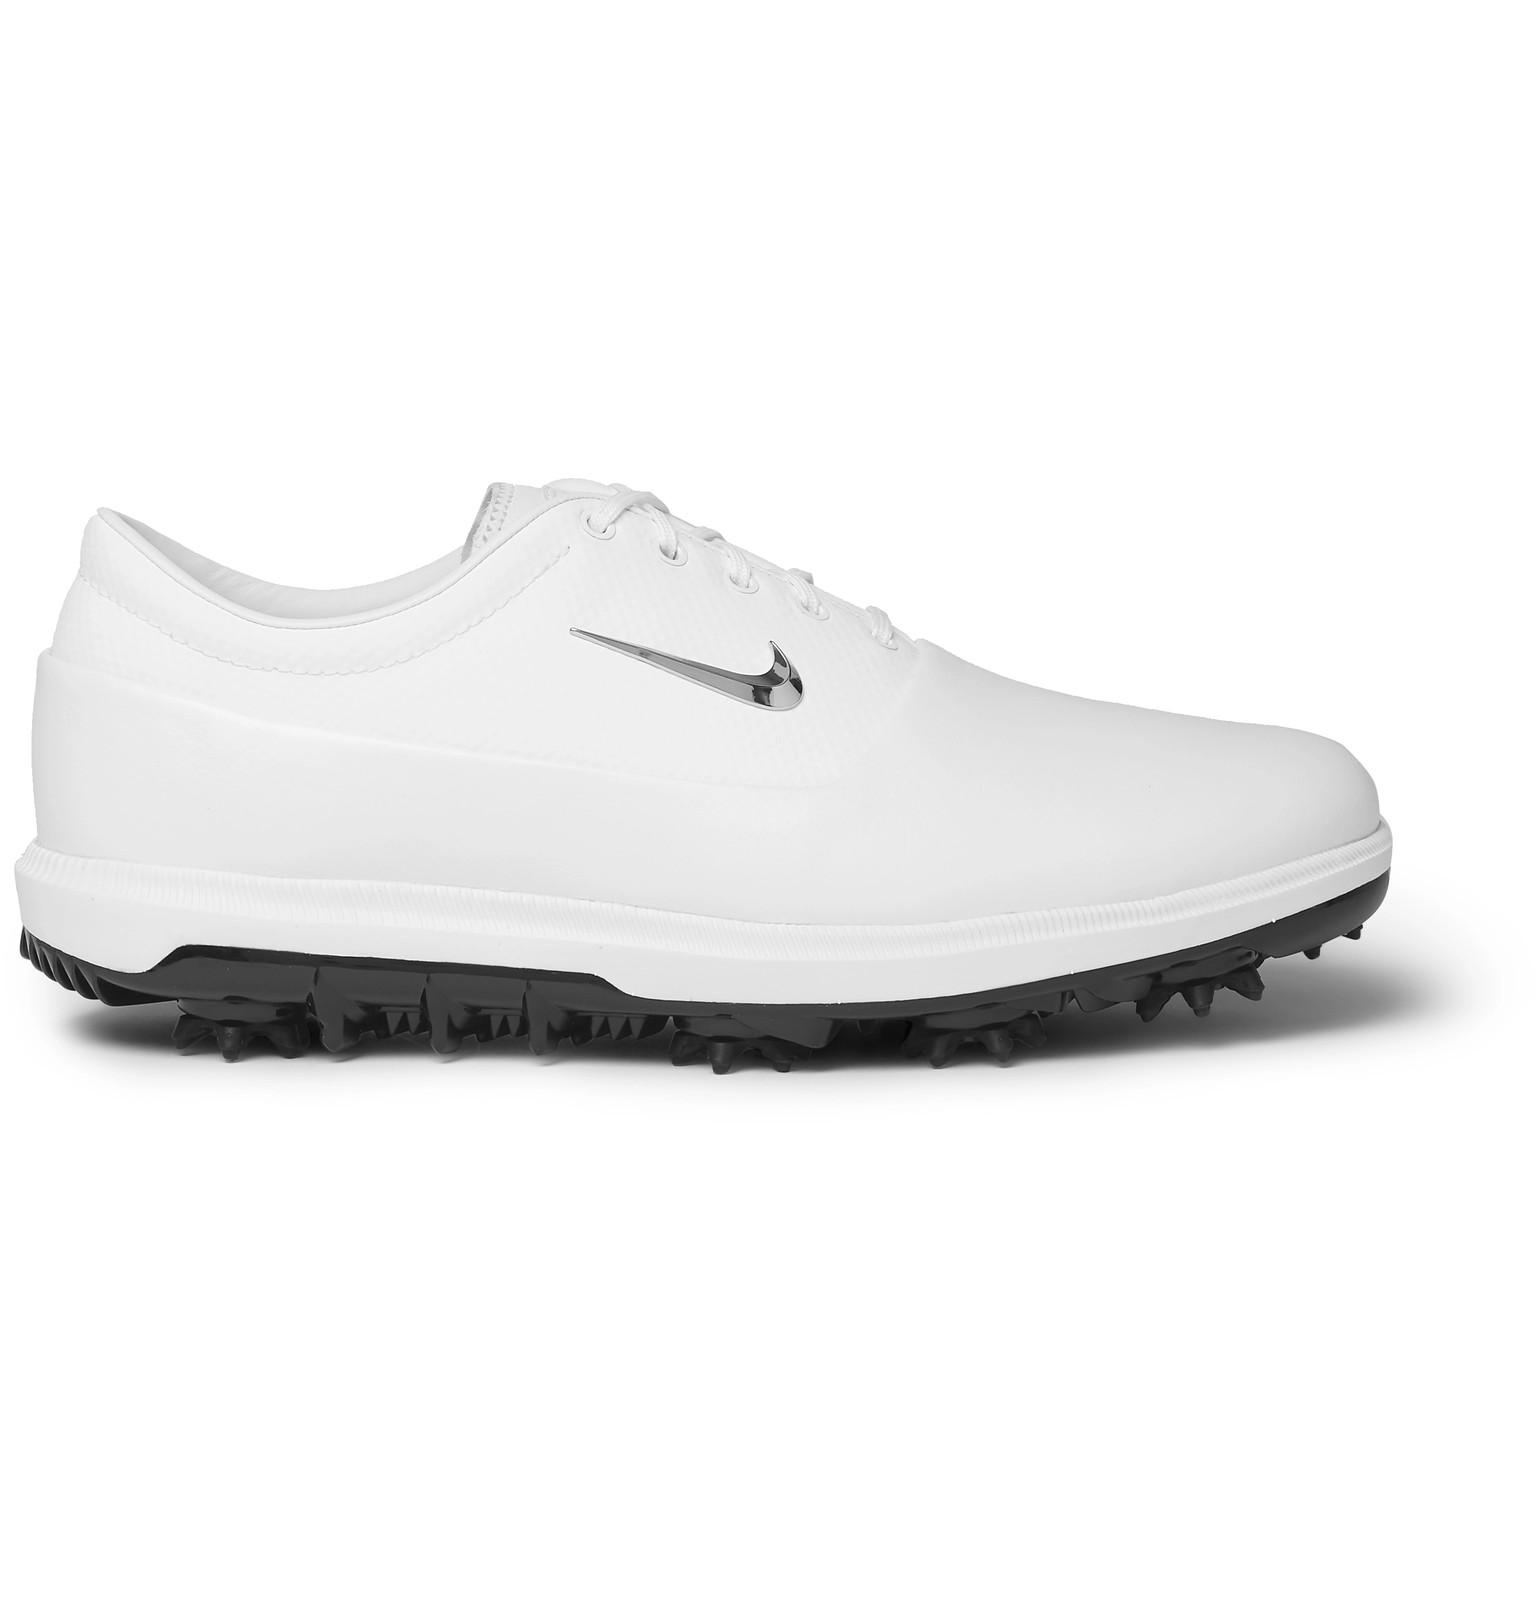 Nike Air Zoom Victory Tour Golf Shoe in White for Men - Lyst